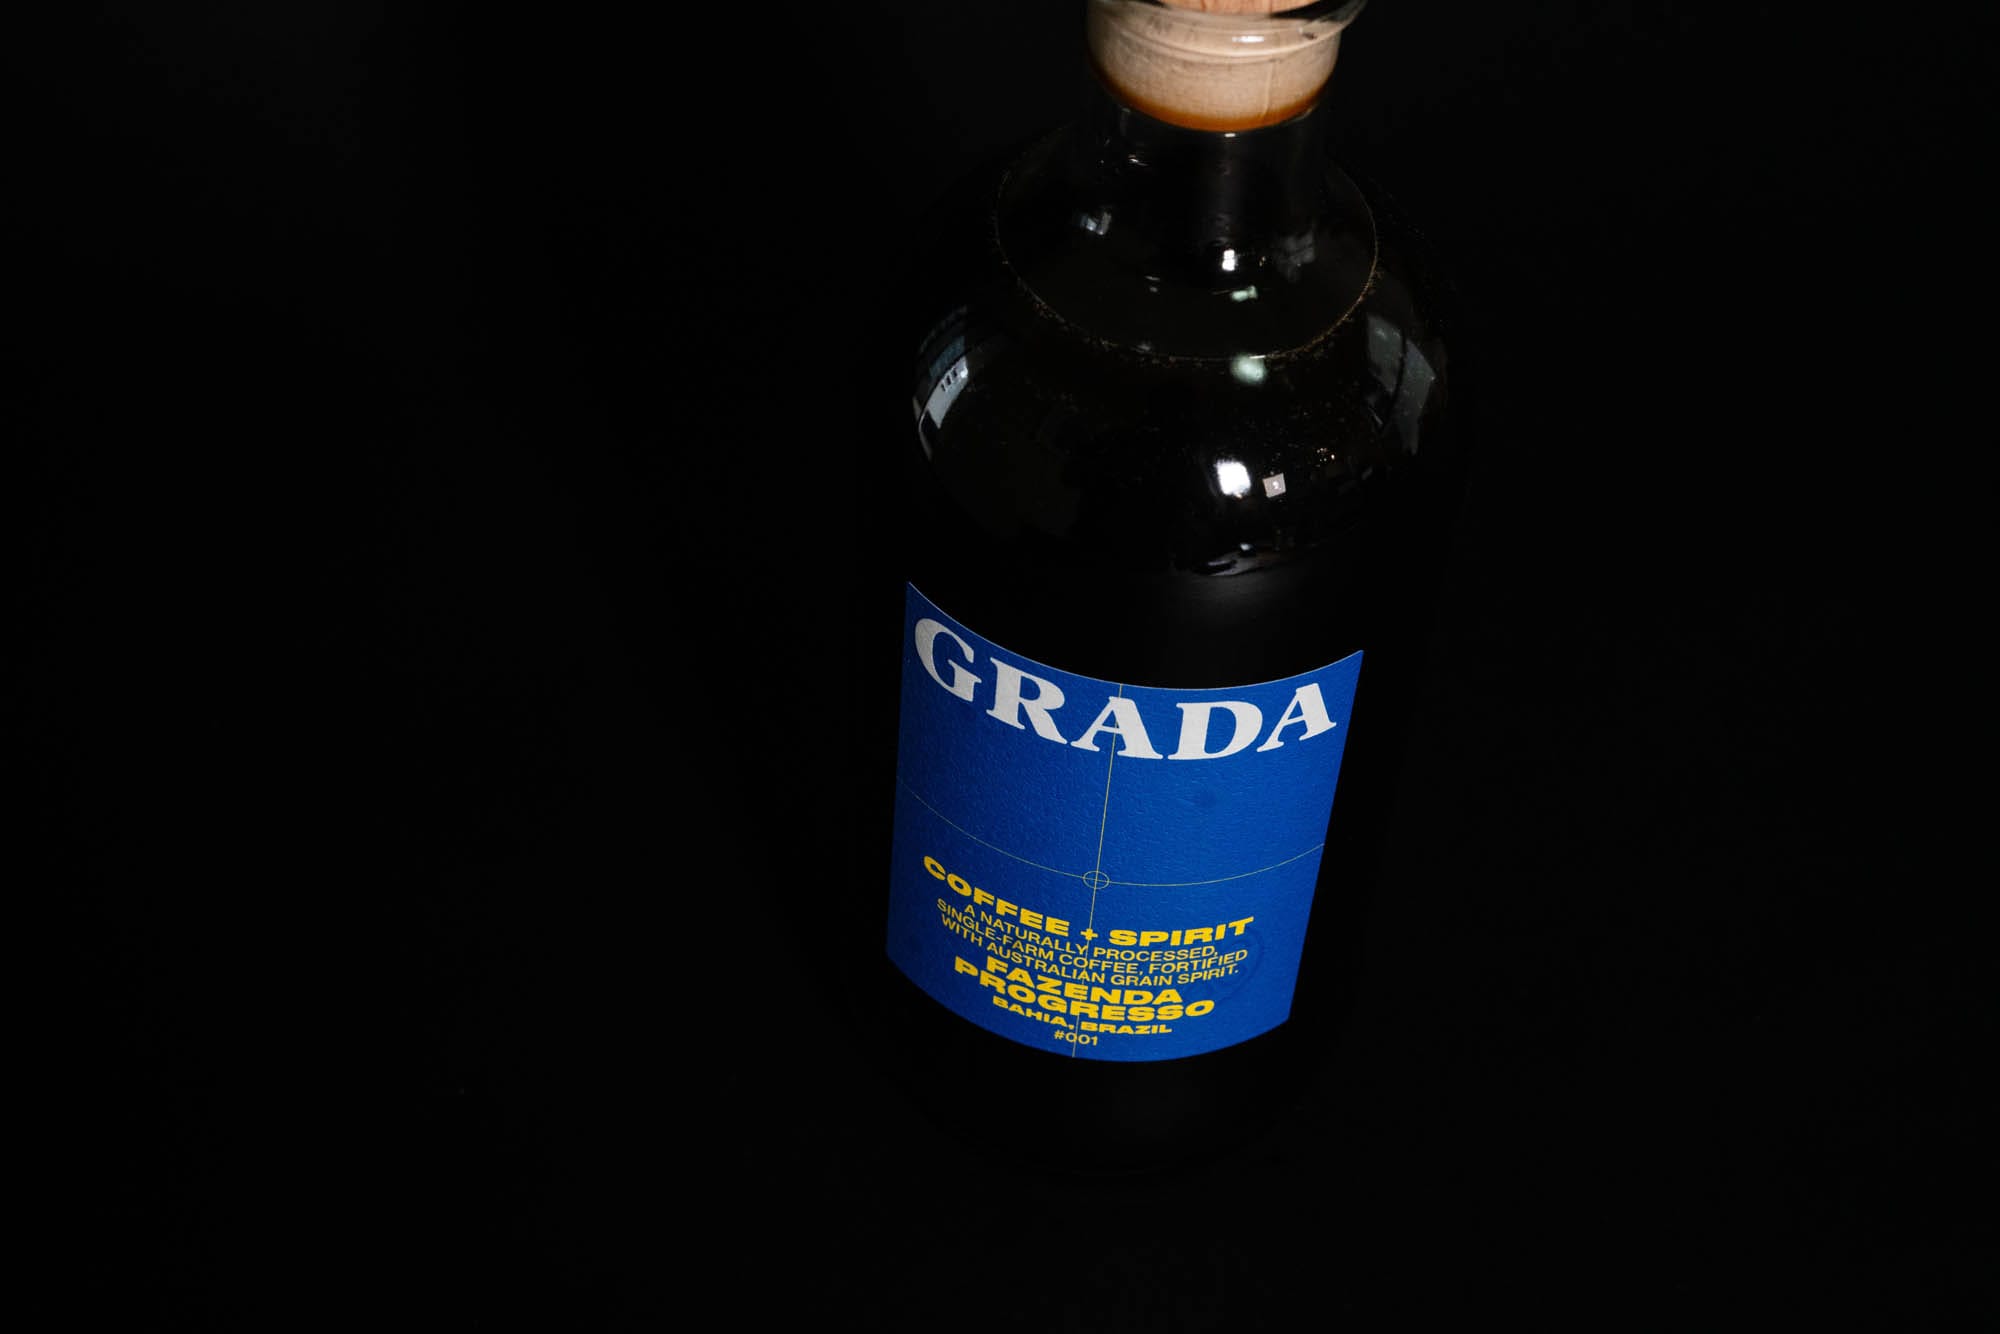 Grada is made in Melbourne with coffee sourced from a single farm in Brazil. Photo: Boothby